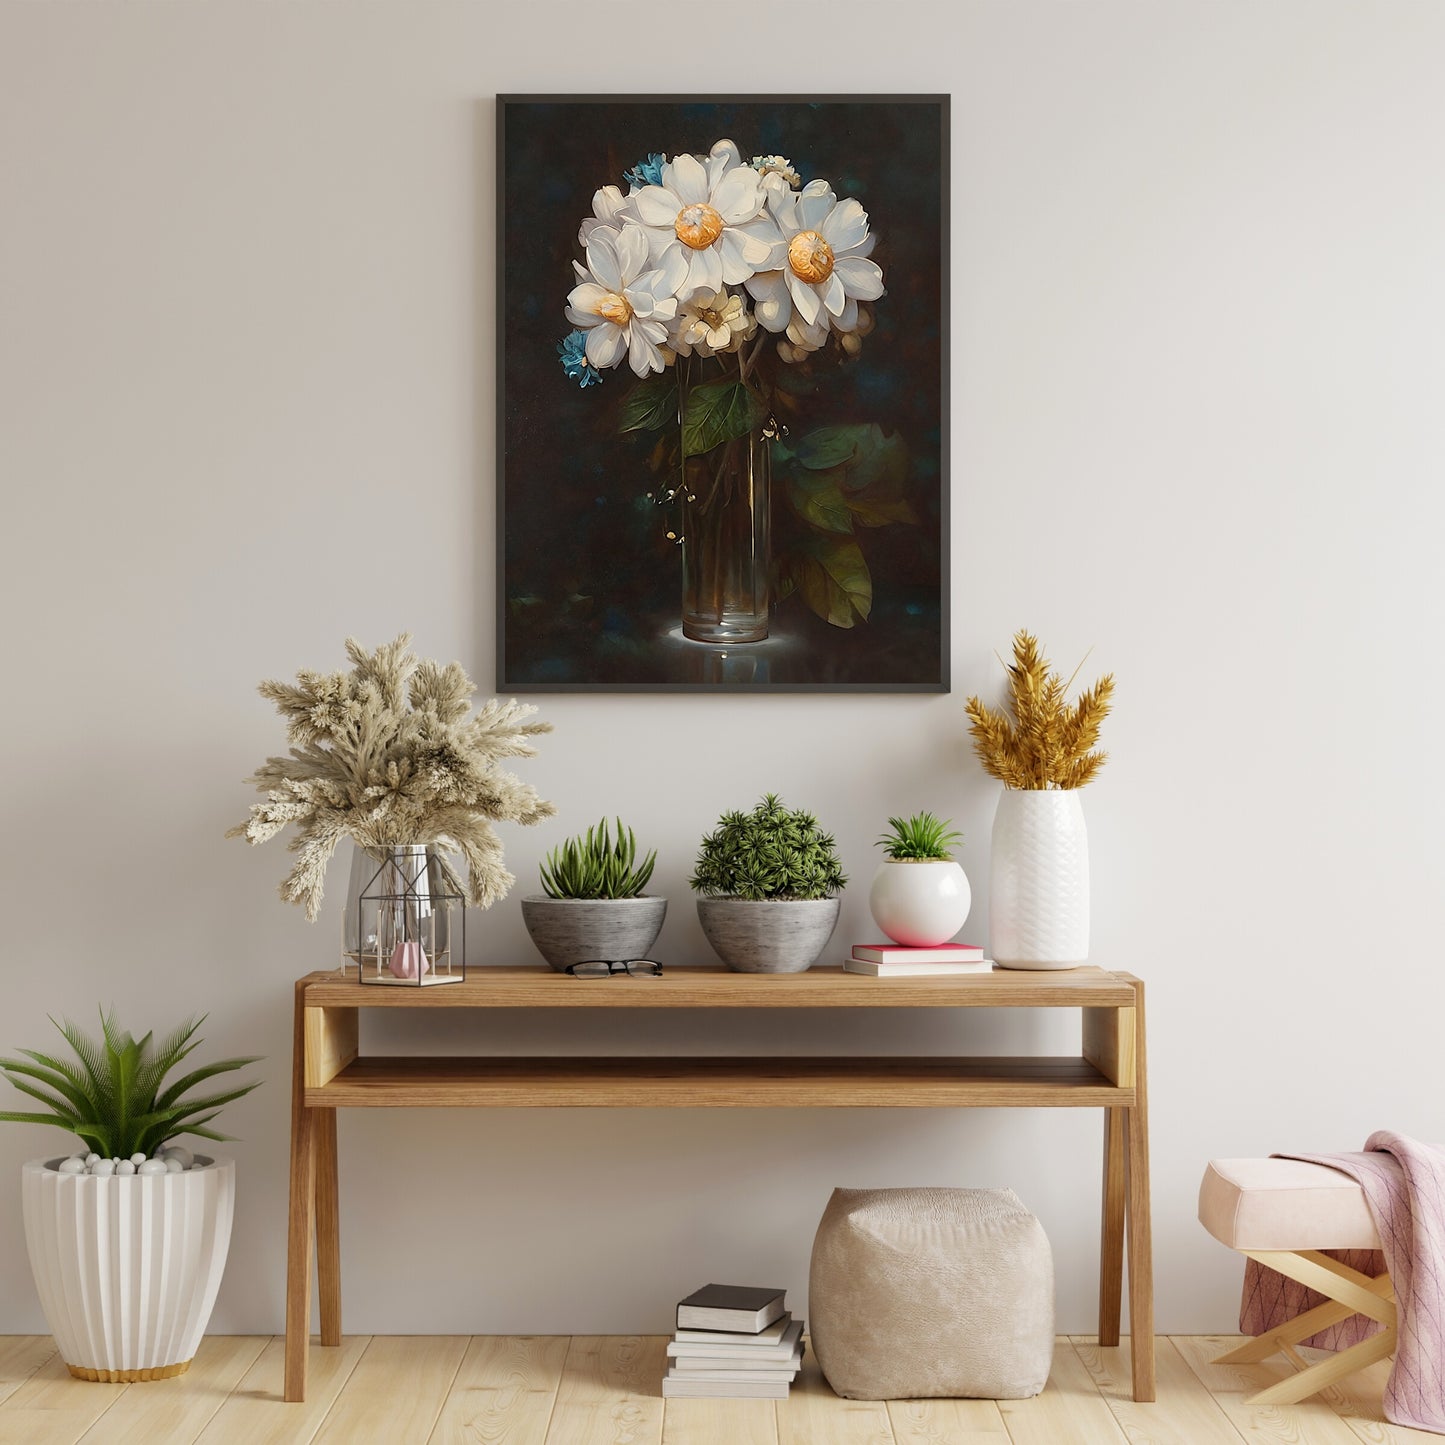 Blooming flowers in glasvase on table still life painting Paper Poster Prints vintage art farmhouse decor floral painting botanic art dark